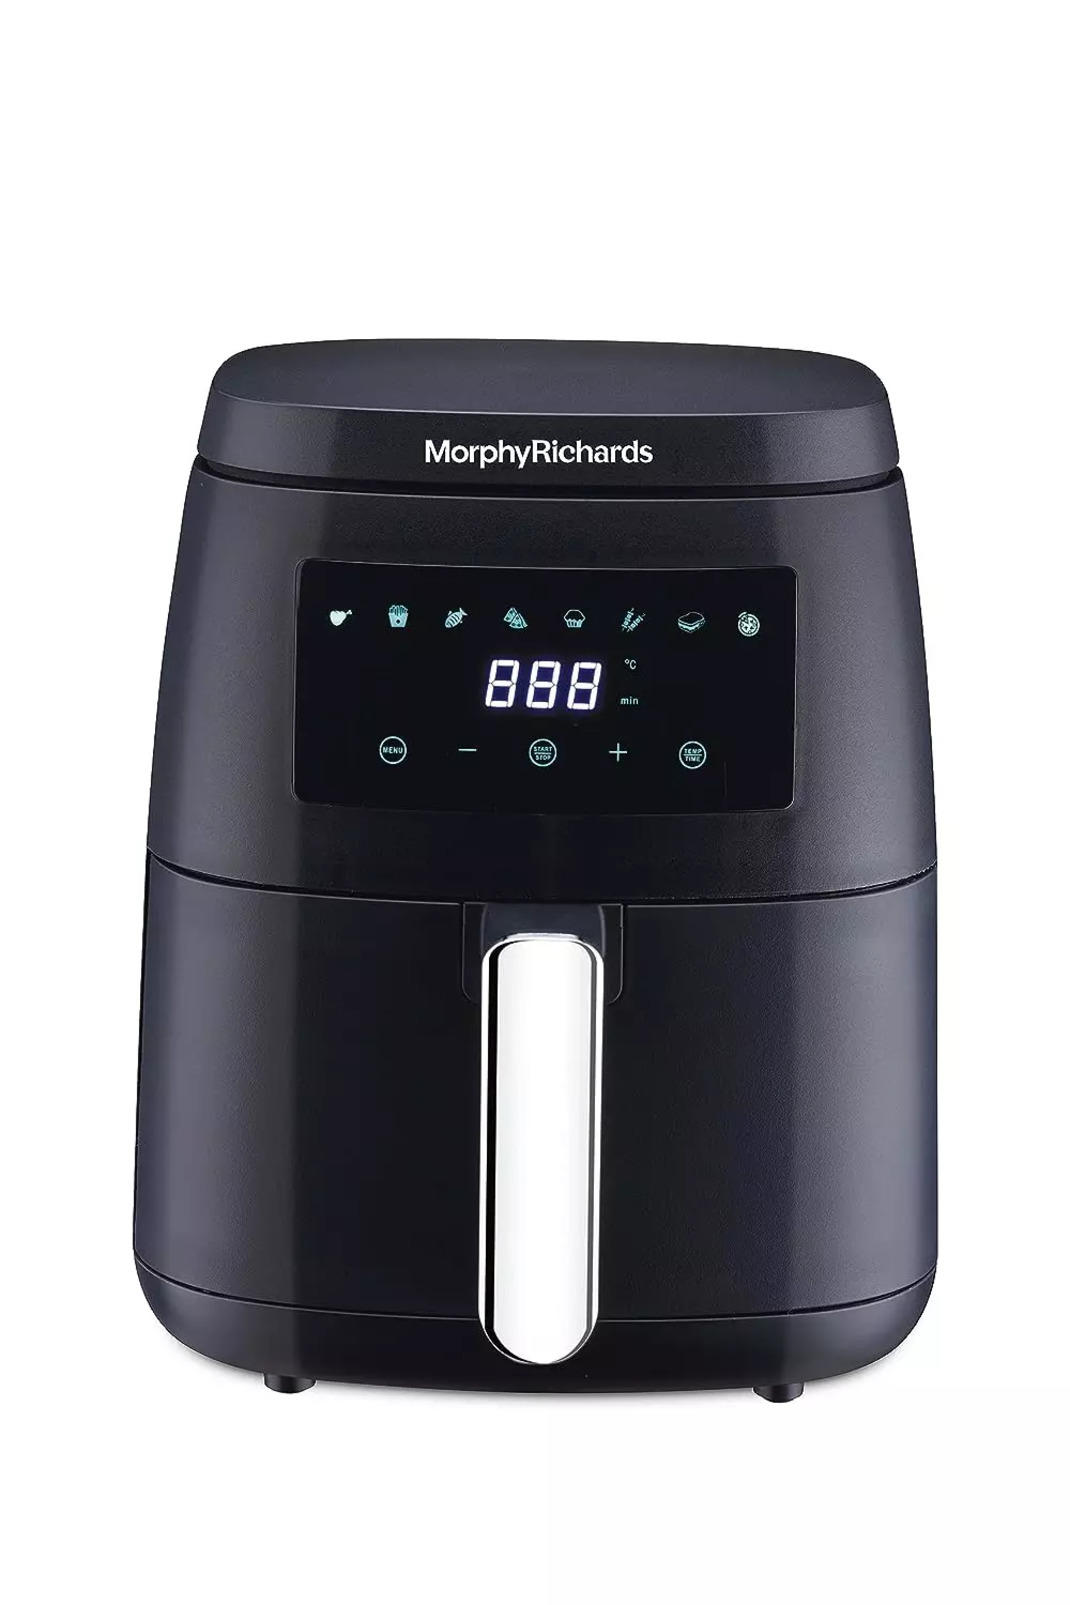 Compare Morphy Richards 5L Digital Air Fryer, 1500 watts, Black vs PHILIPS  Air Fryer HD9200/90, uses up to 90% less fat, 1400W, 4.1 Liter, with Rapid  Air Technology (Black), Large vs Philips